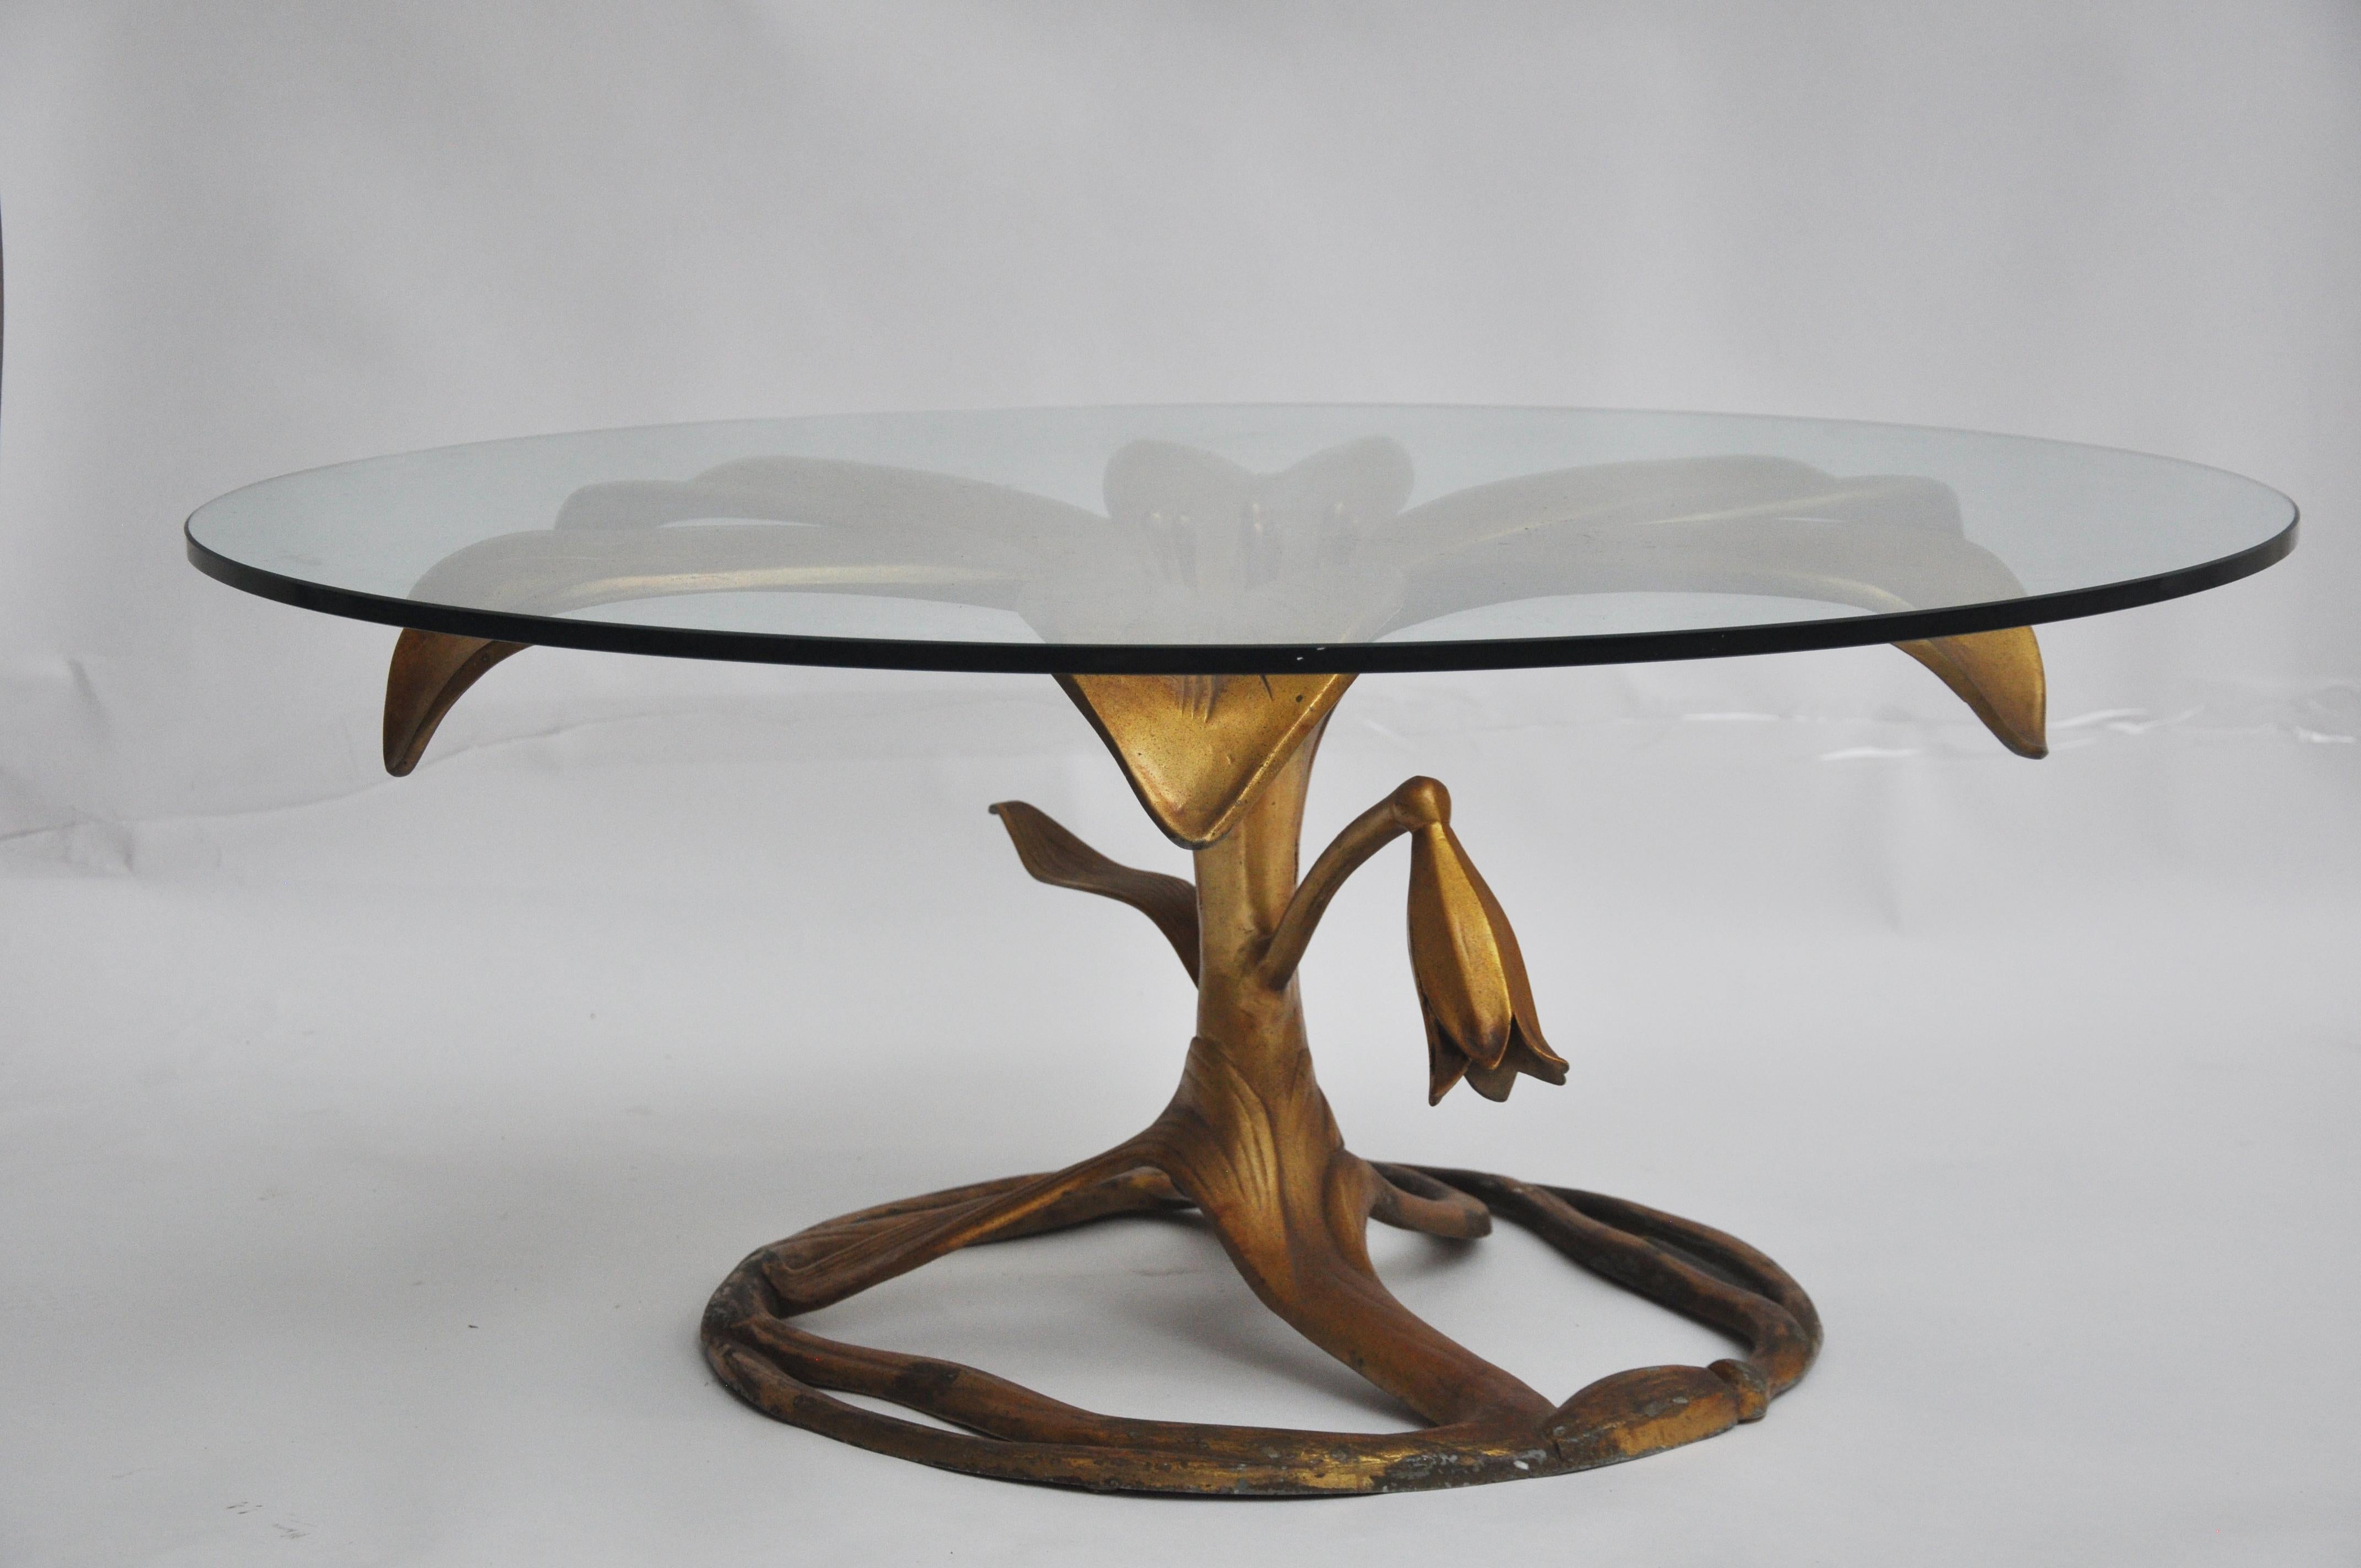 The coffee table is made out of aluminum and painted in gold. There is a large glass round top. There is some patina on the metal base.